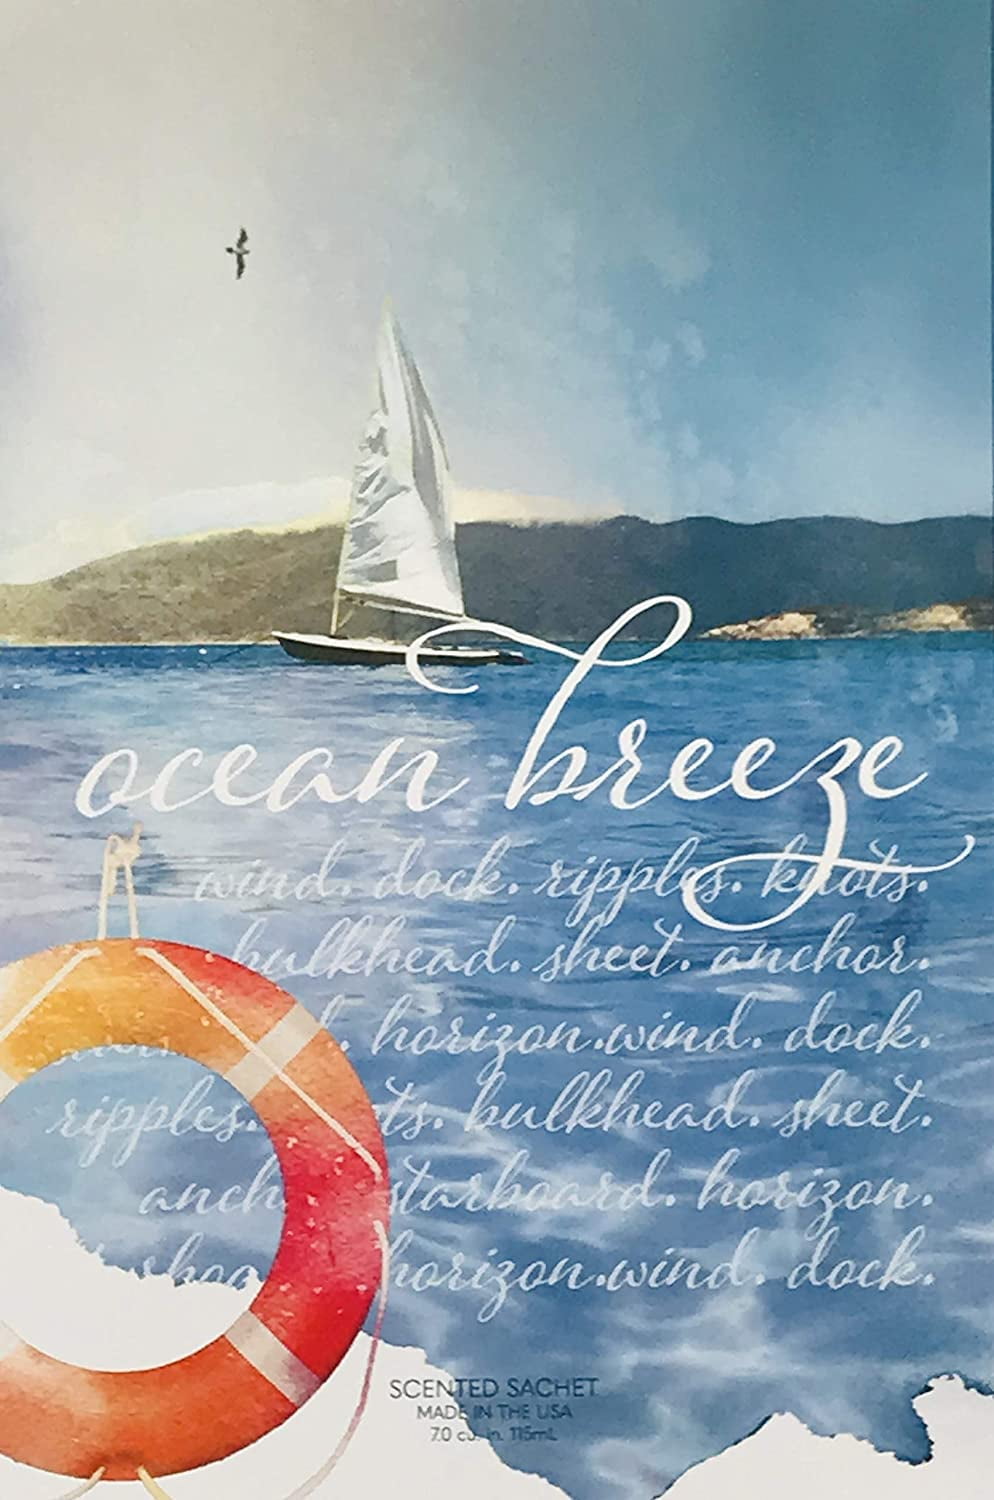 Ocean Breeze Scented Sachets - 12 Pack, Long-Lasting Home Fragrance Sachet  Bags, Large Fresh-Scented Packets, Scented Sachets for Drawer and Closet